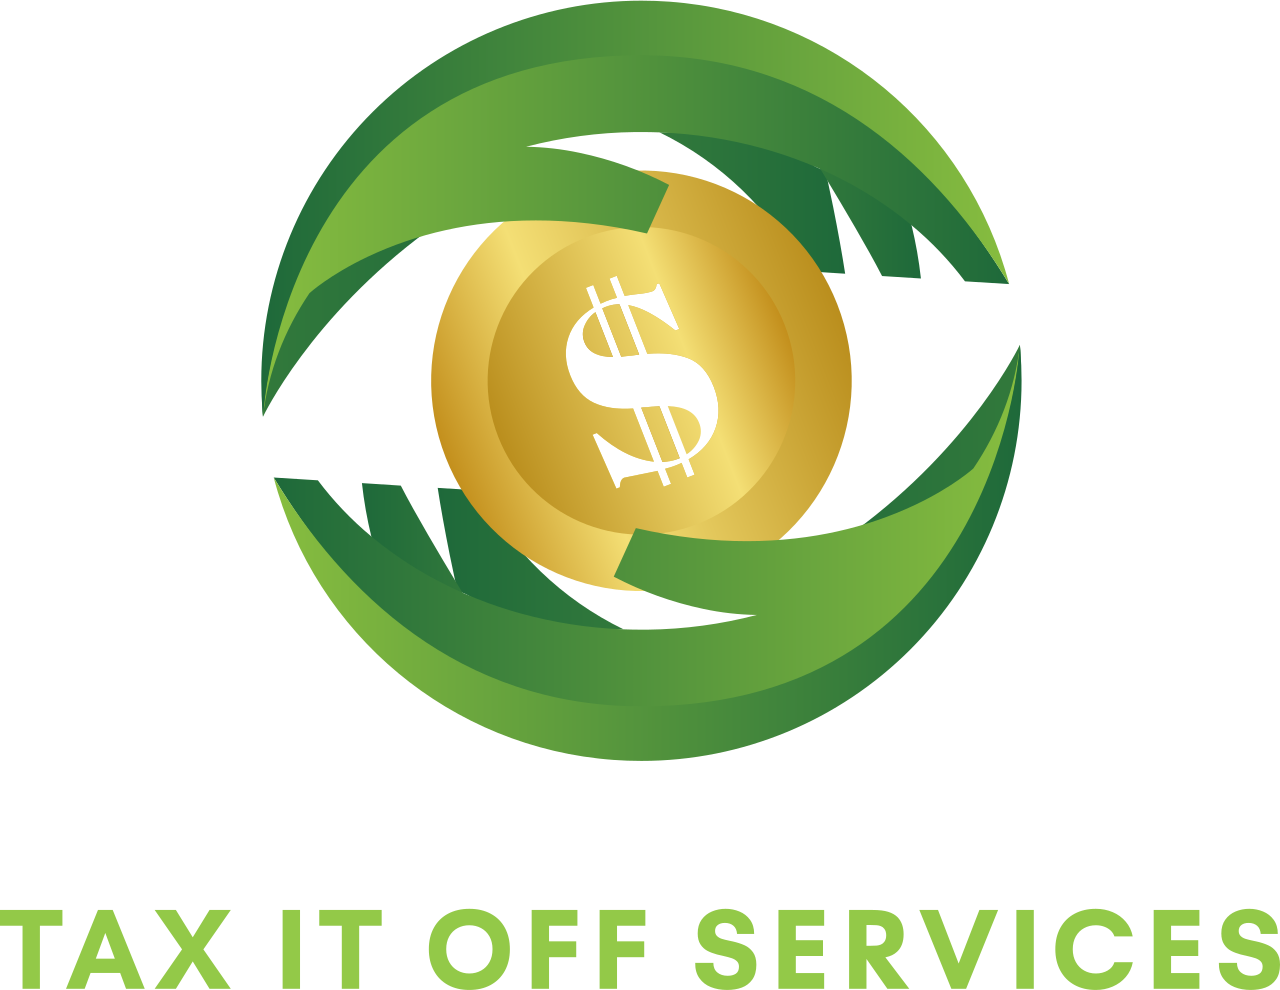 TAX IT OFF SERVICES's logo